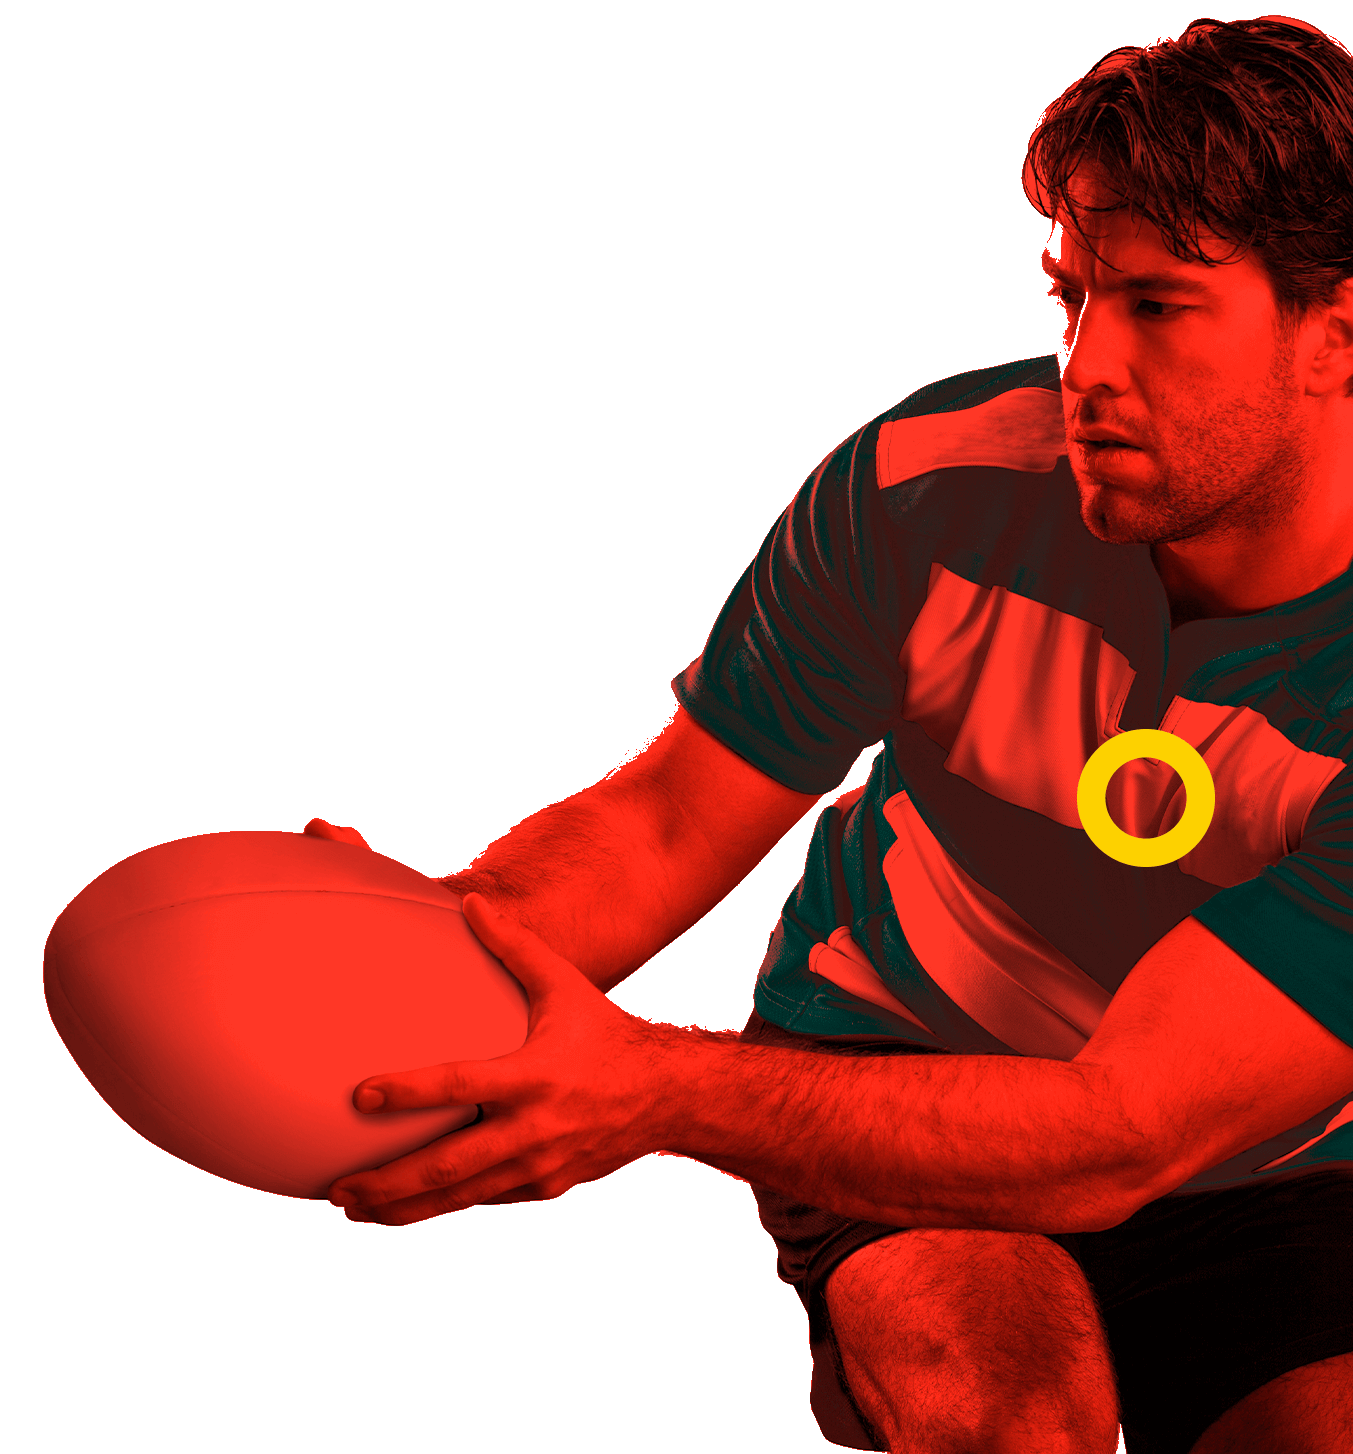 In the picture, a rugby player holding the rugby ball.